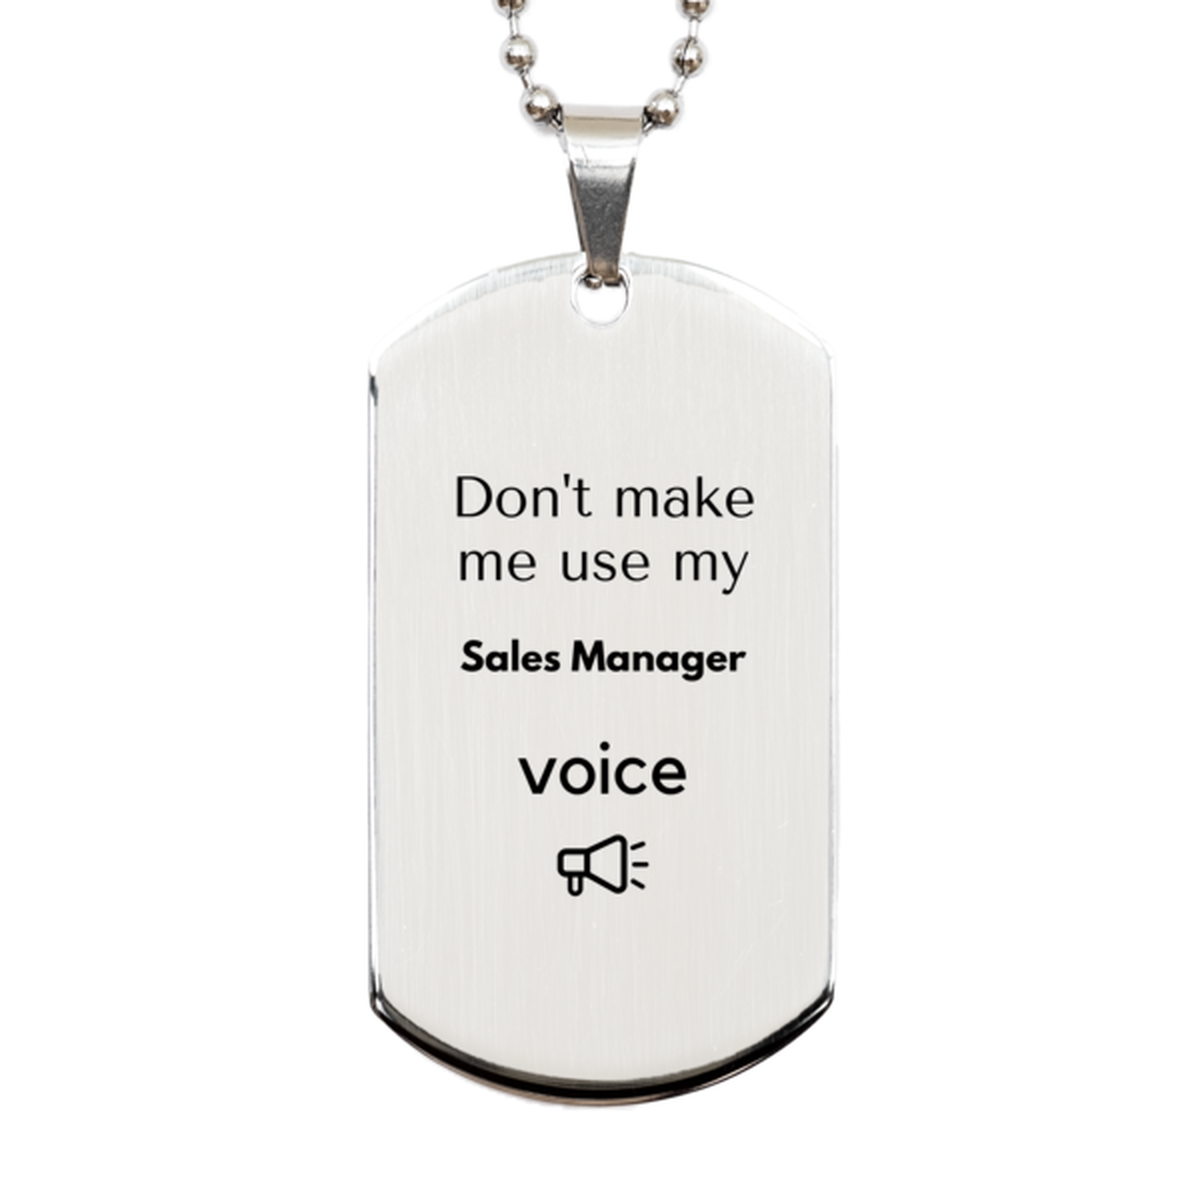 Don't make me use my Sales Manager voice, Sarcasm Sales Manager Gifts, Christmas Sales Manager Silver Dog Tag Birthday Unique Gifts For Sales Manager Coworkers, Men, Women, Colleague, Friends